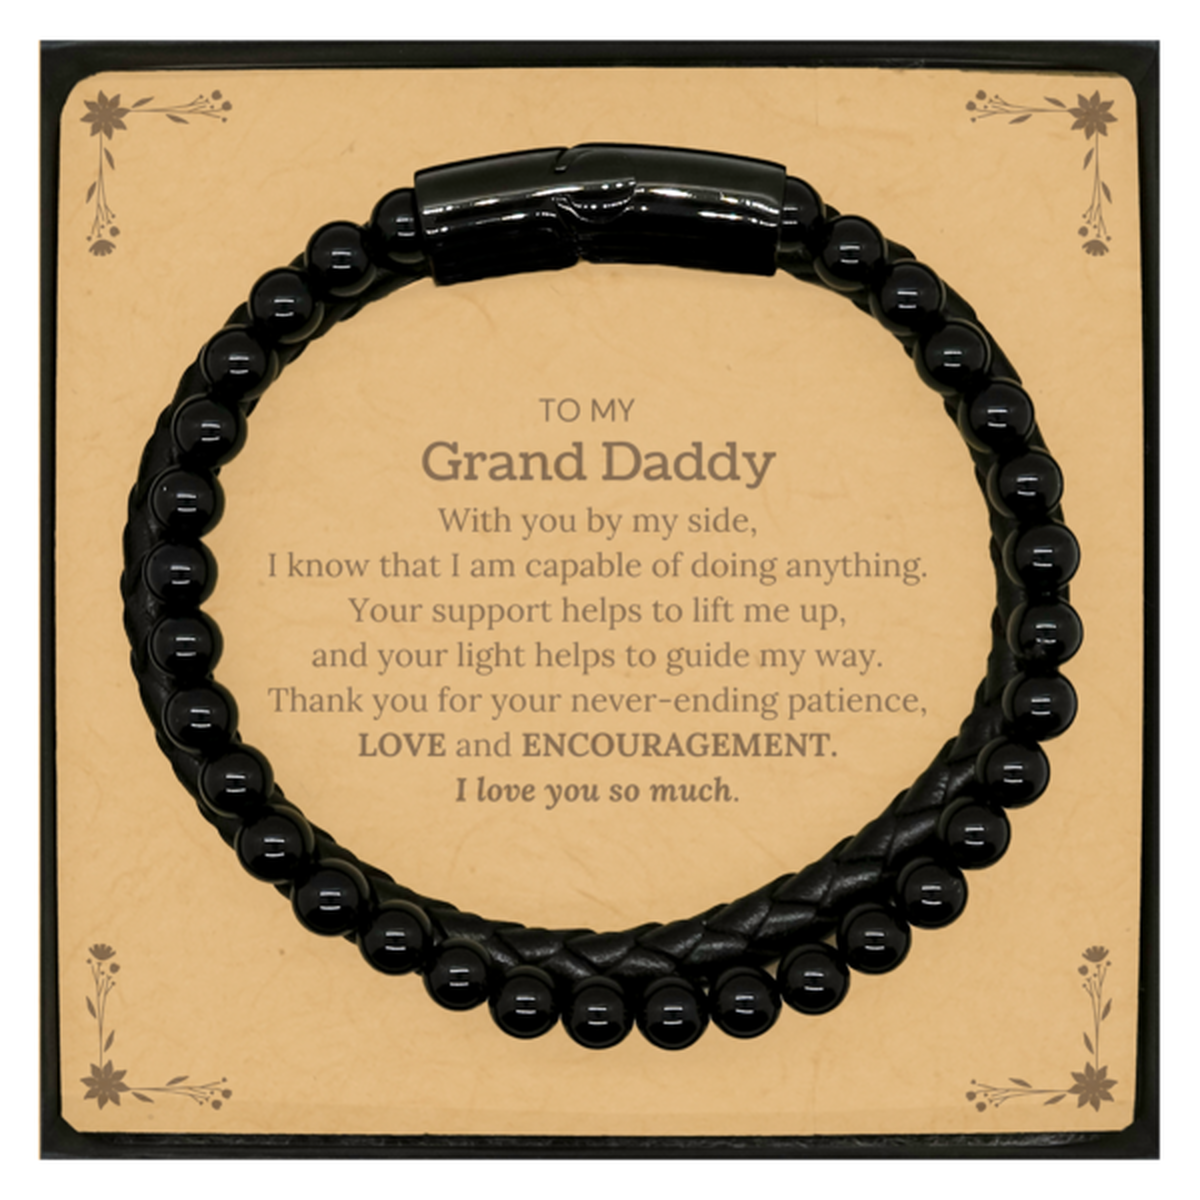 Appreciation Grand Daddy Stone Leather Bracelets Gifts, To My Grand Daddy Birthday Christmas Wedding Keepsake Gifts for Grand Daddy With you by my side, I know that I am capable of doing anything. I love you so much